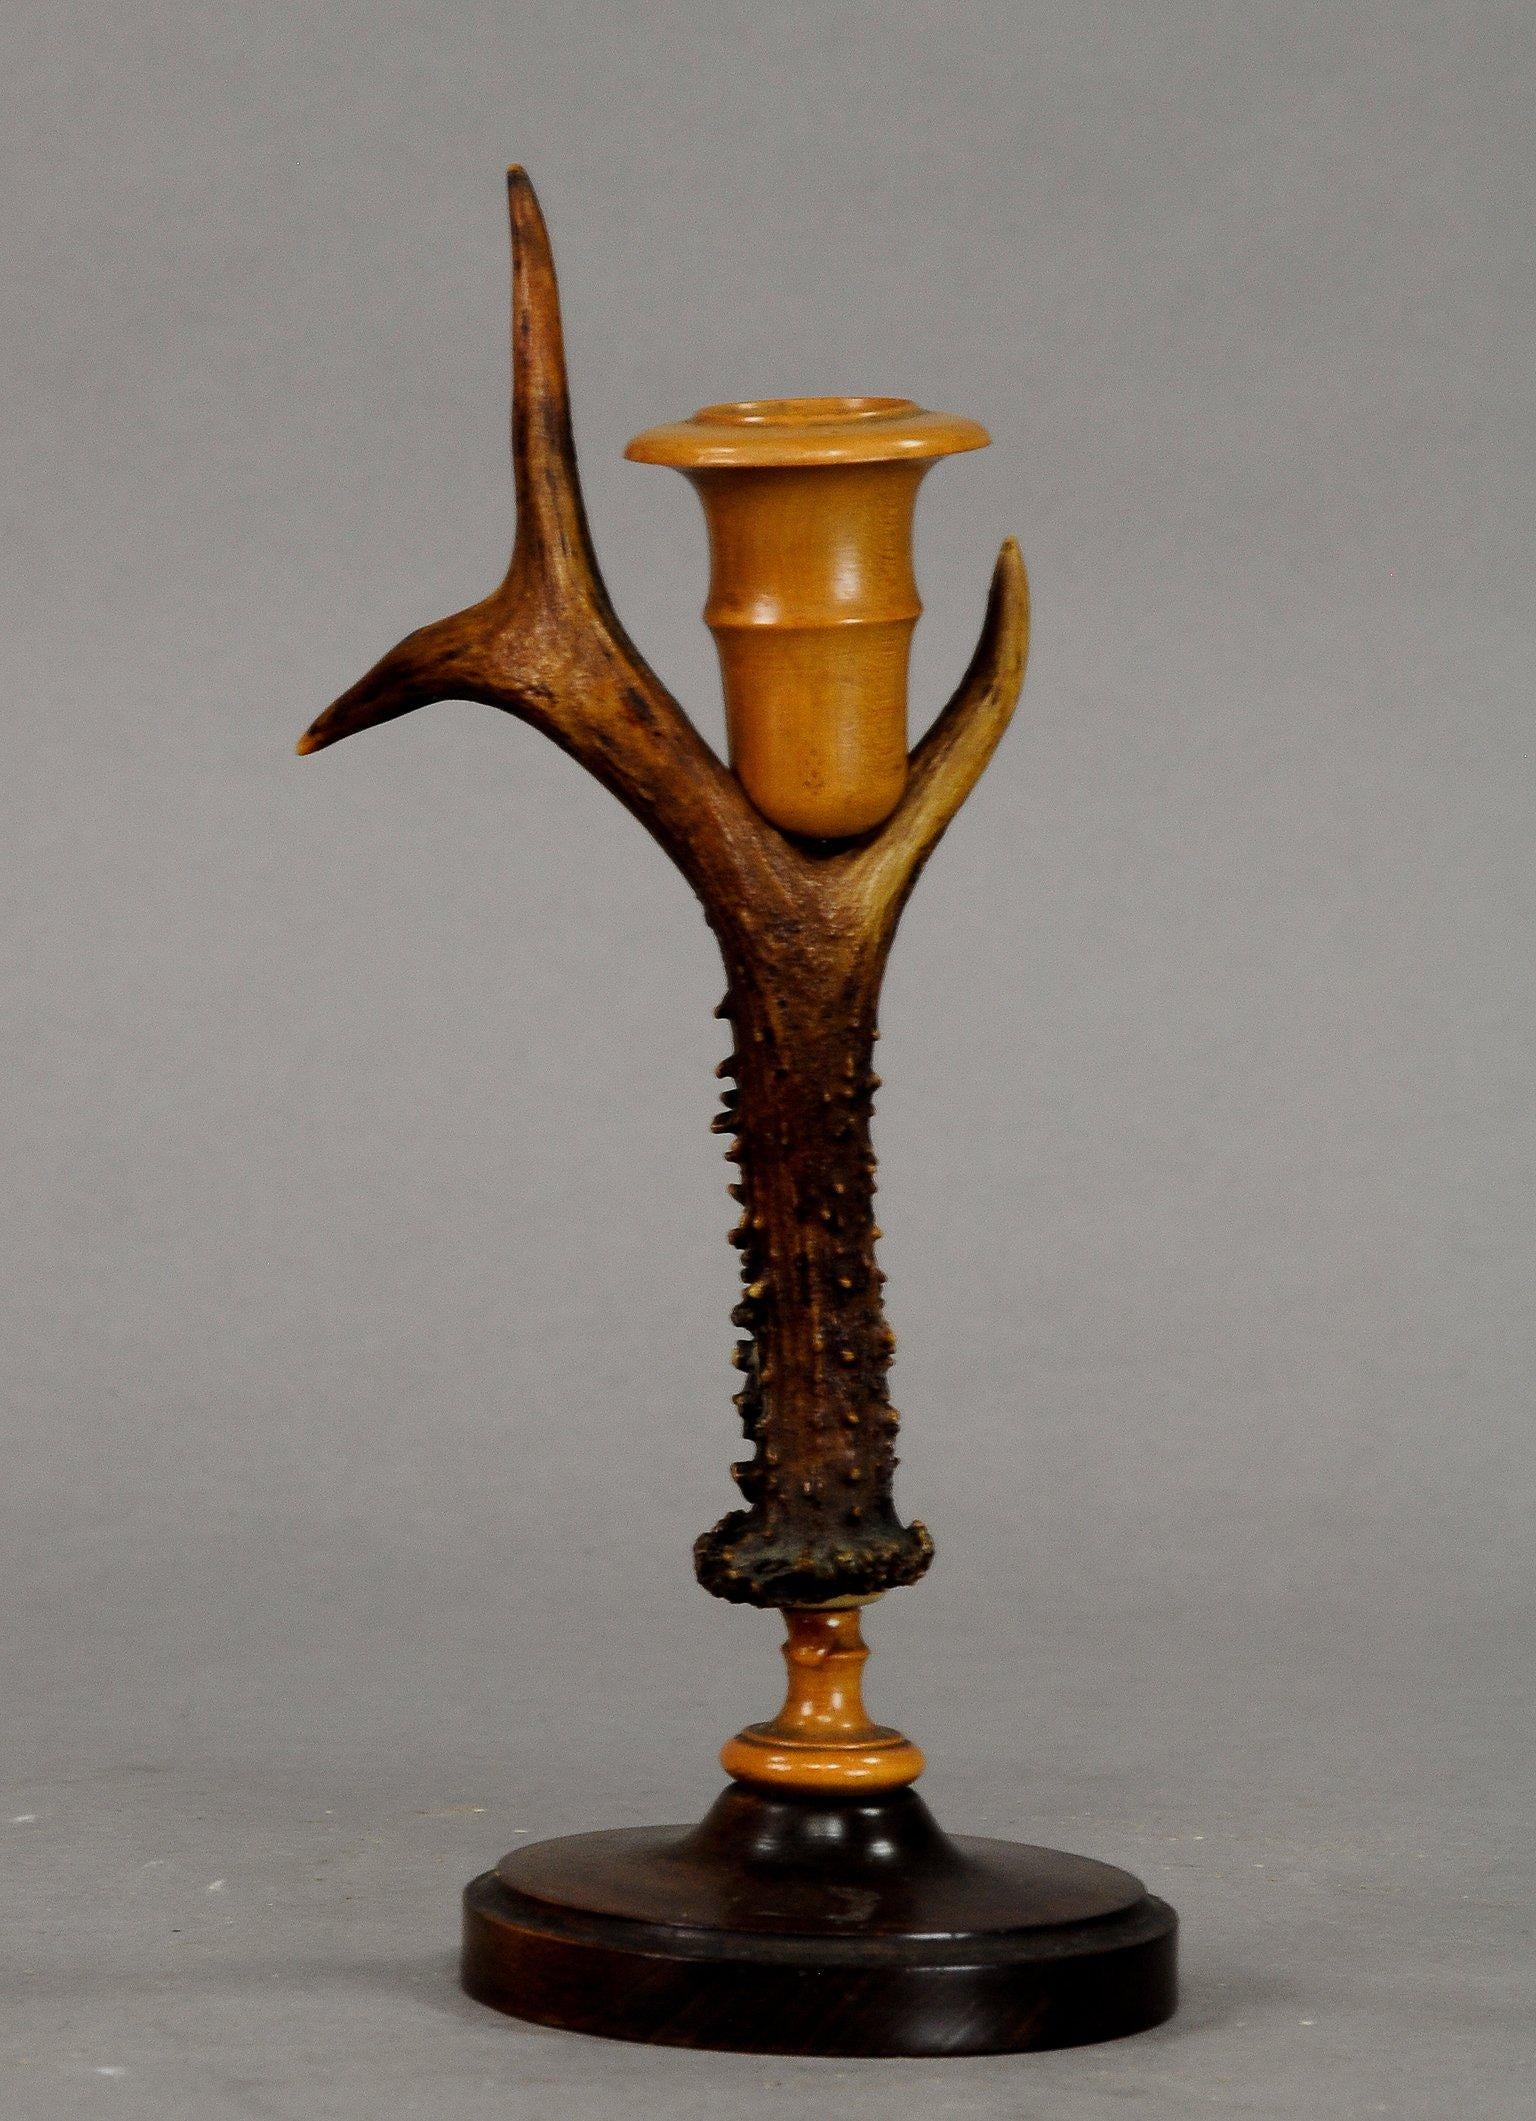 A pair of rustic candleholders, made of deer antlers, base and spouts made of turned wood. Executed in Germany, circa 1900.

Measures: Height 10.63